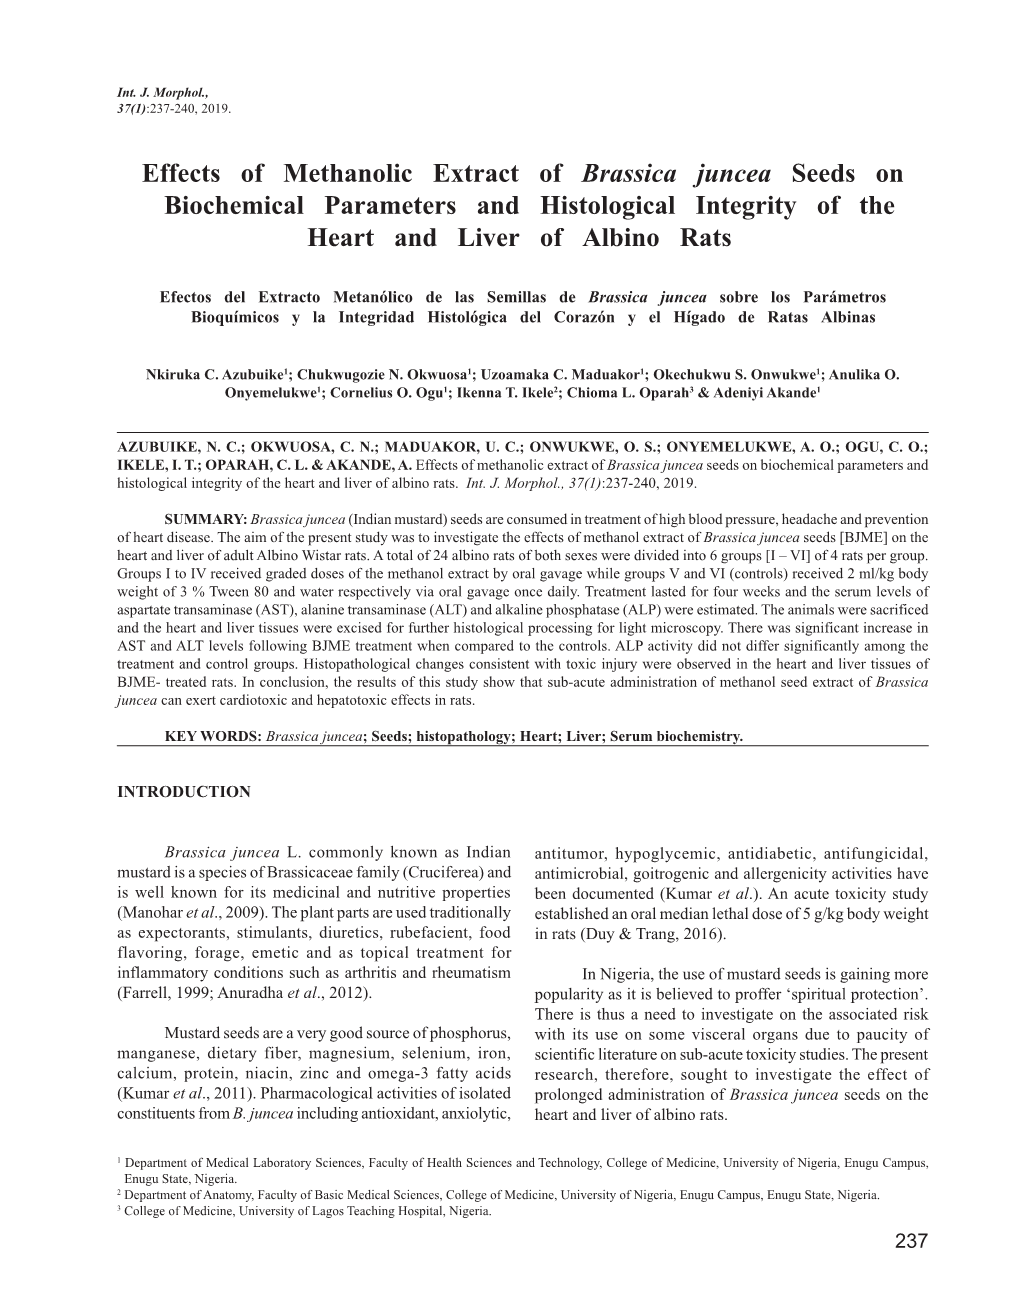 Effects of Methanolic Extract of Brassica Juncea Seeds on Biochemical Parameters and Histological Integrity of the Heart and Liver of Albino Rats